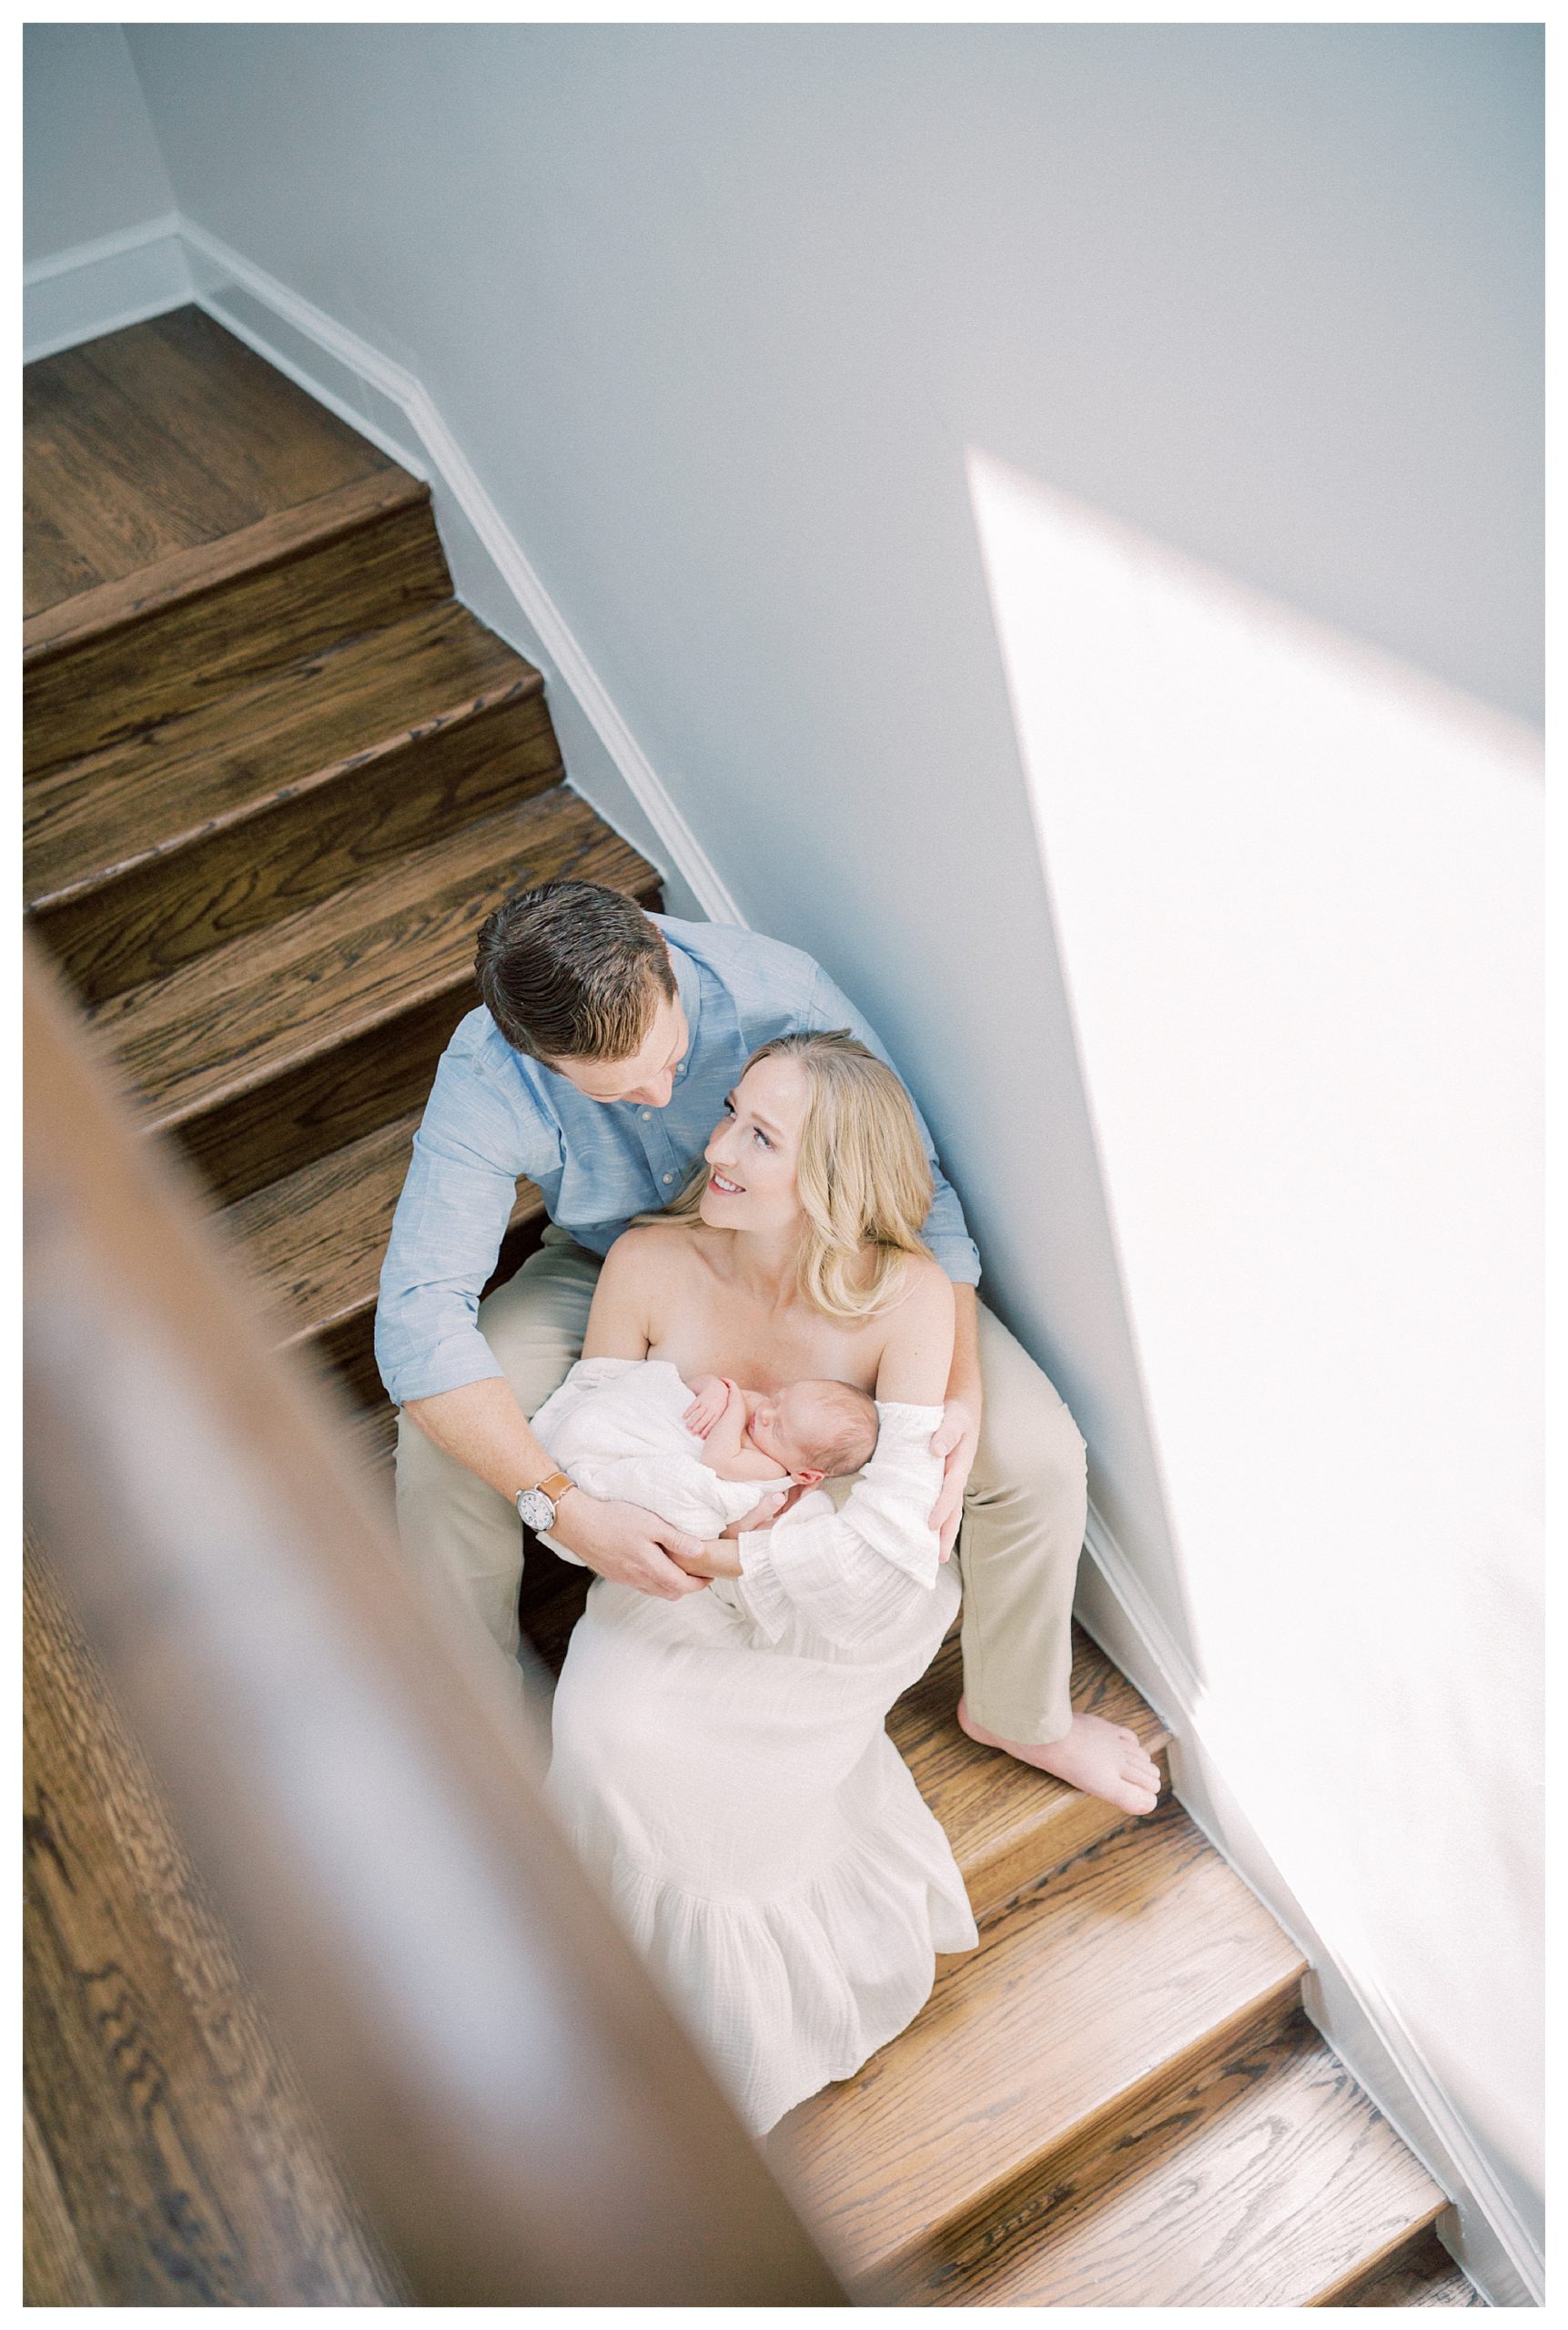 New parents sit on their steps holding newborn baby during their DC newborn session.